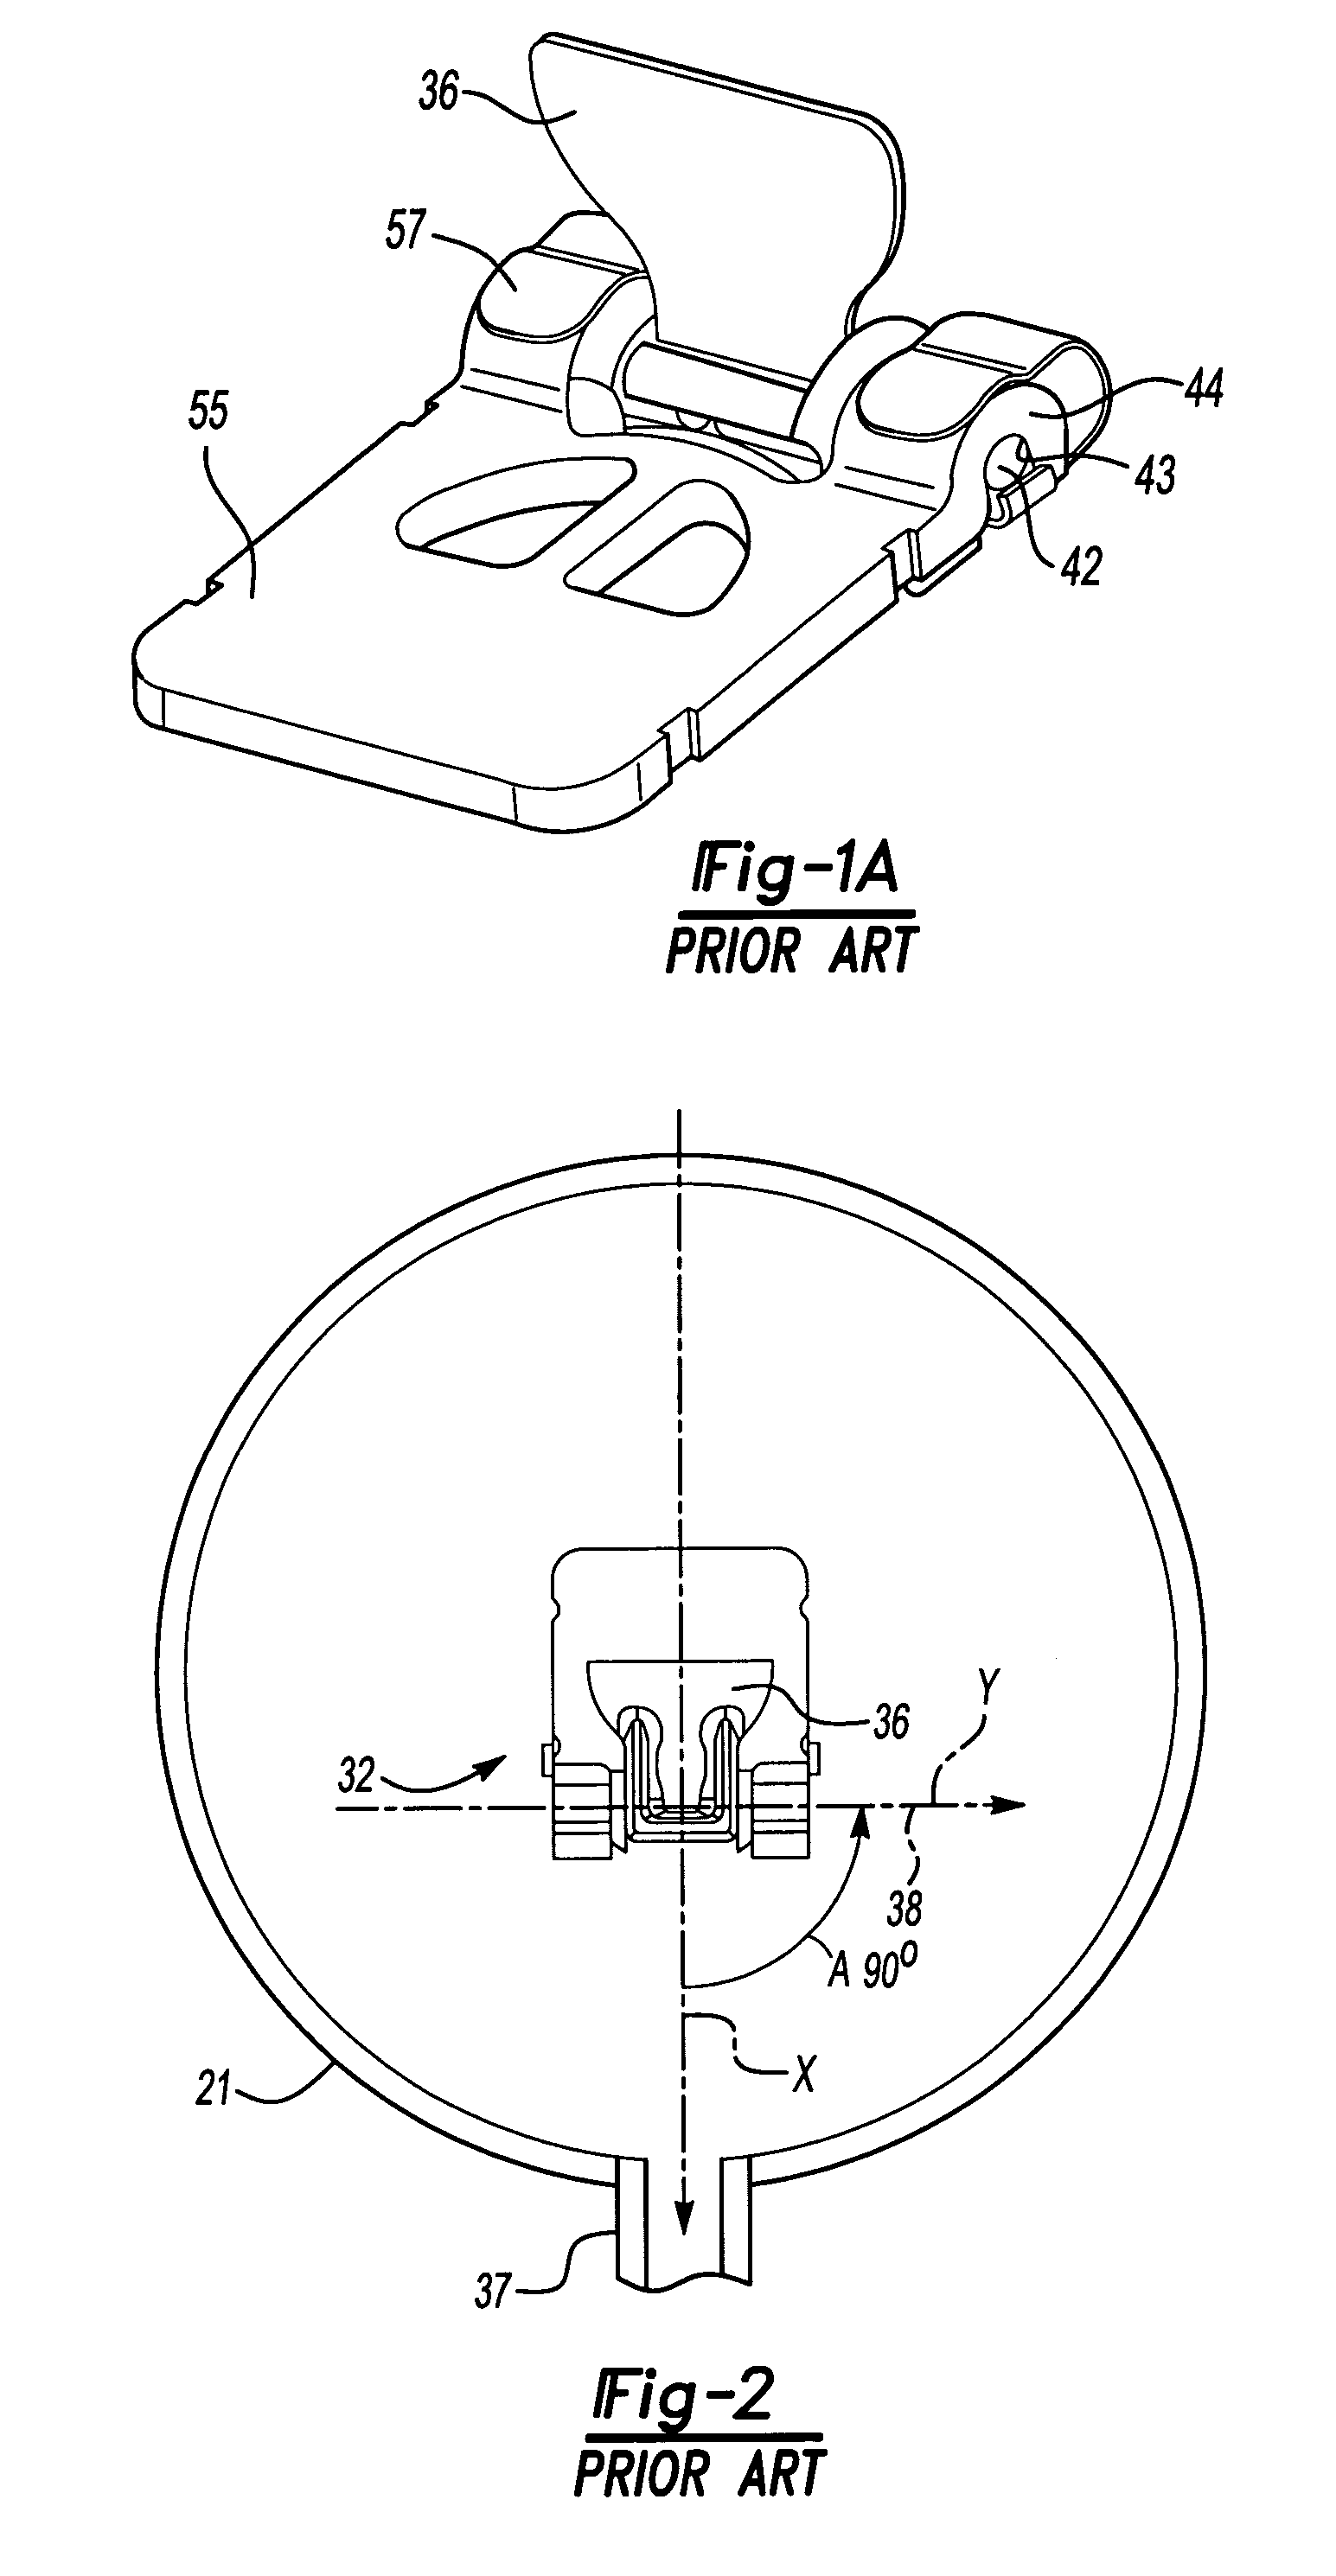 Compressor with check valve orientated at angle relative to discharge tube